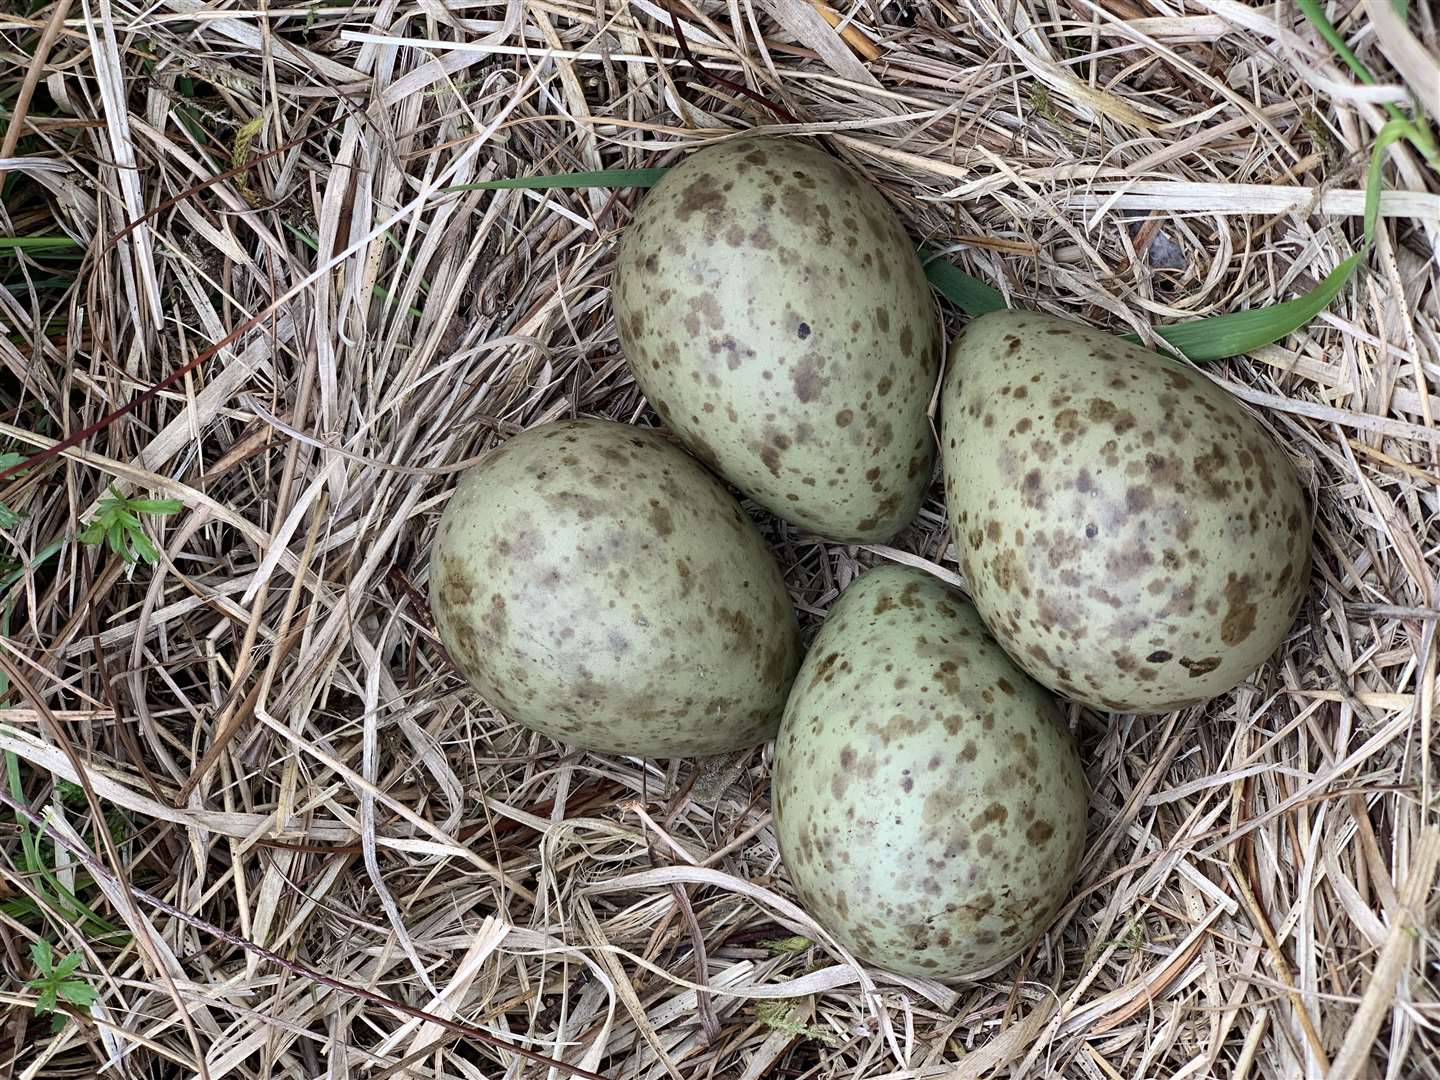 Curlew eggs rescued from a peatland fire (LoughNeaghPartnership/PA)